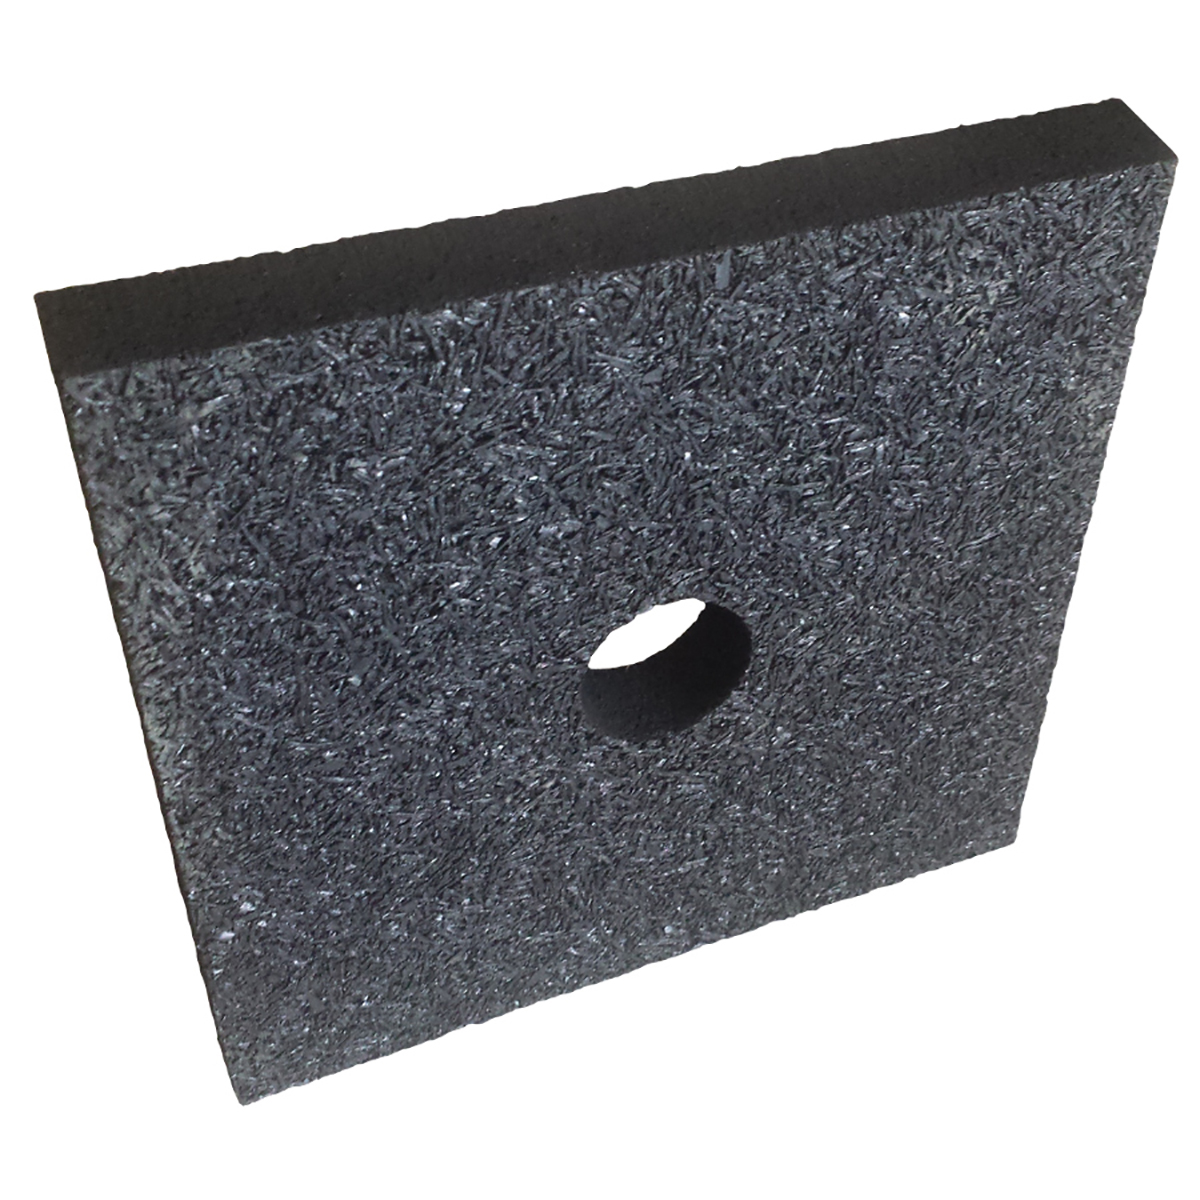 Reconstituted Rubber Sheet Tile